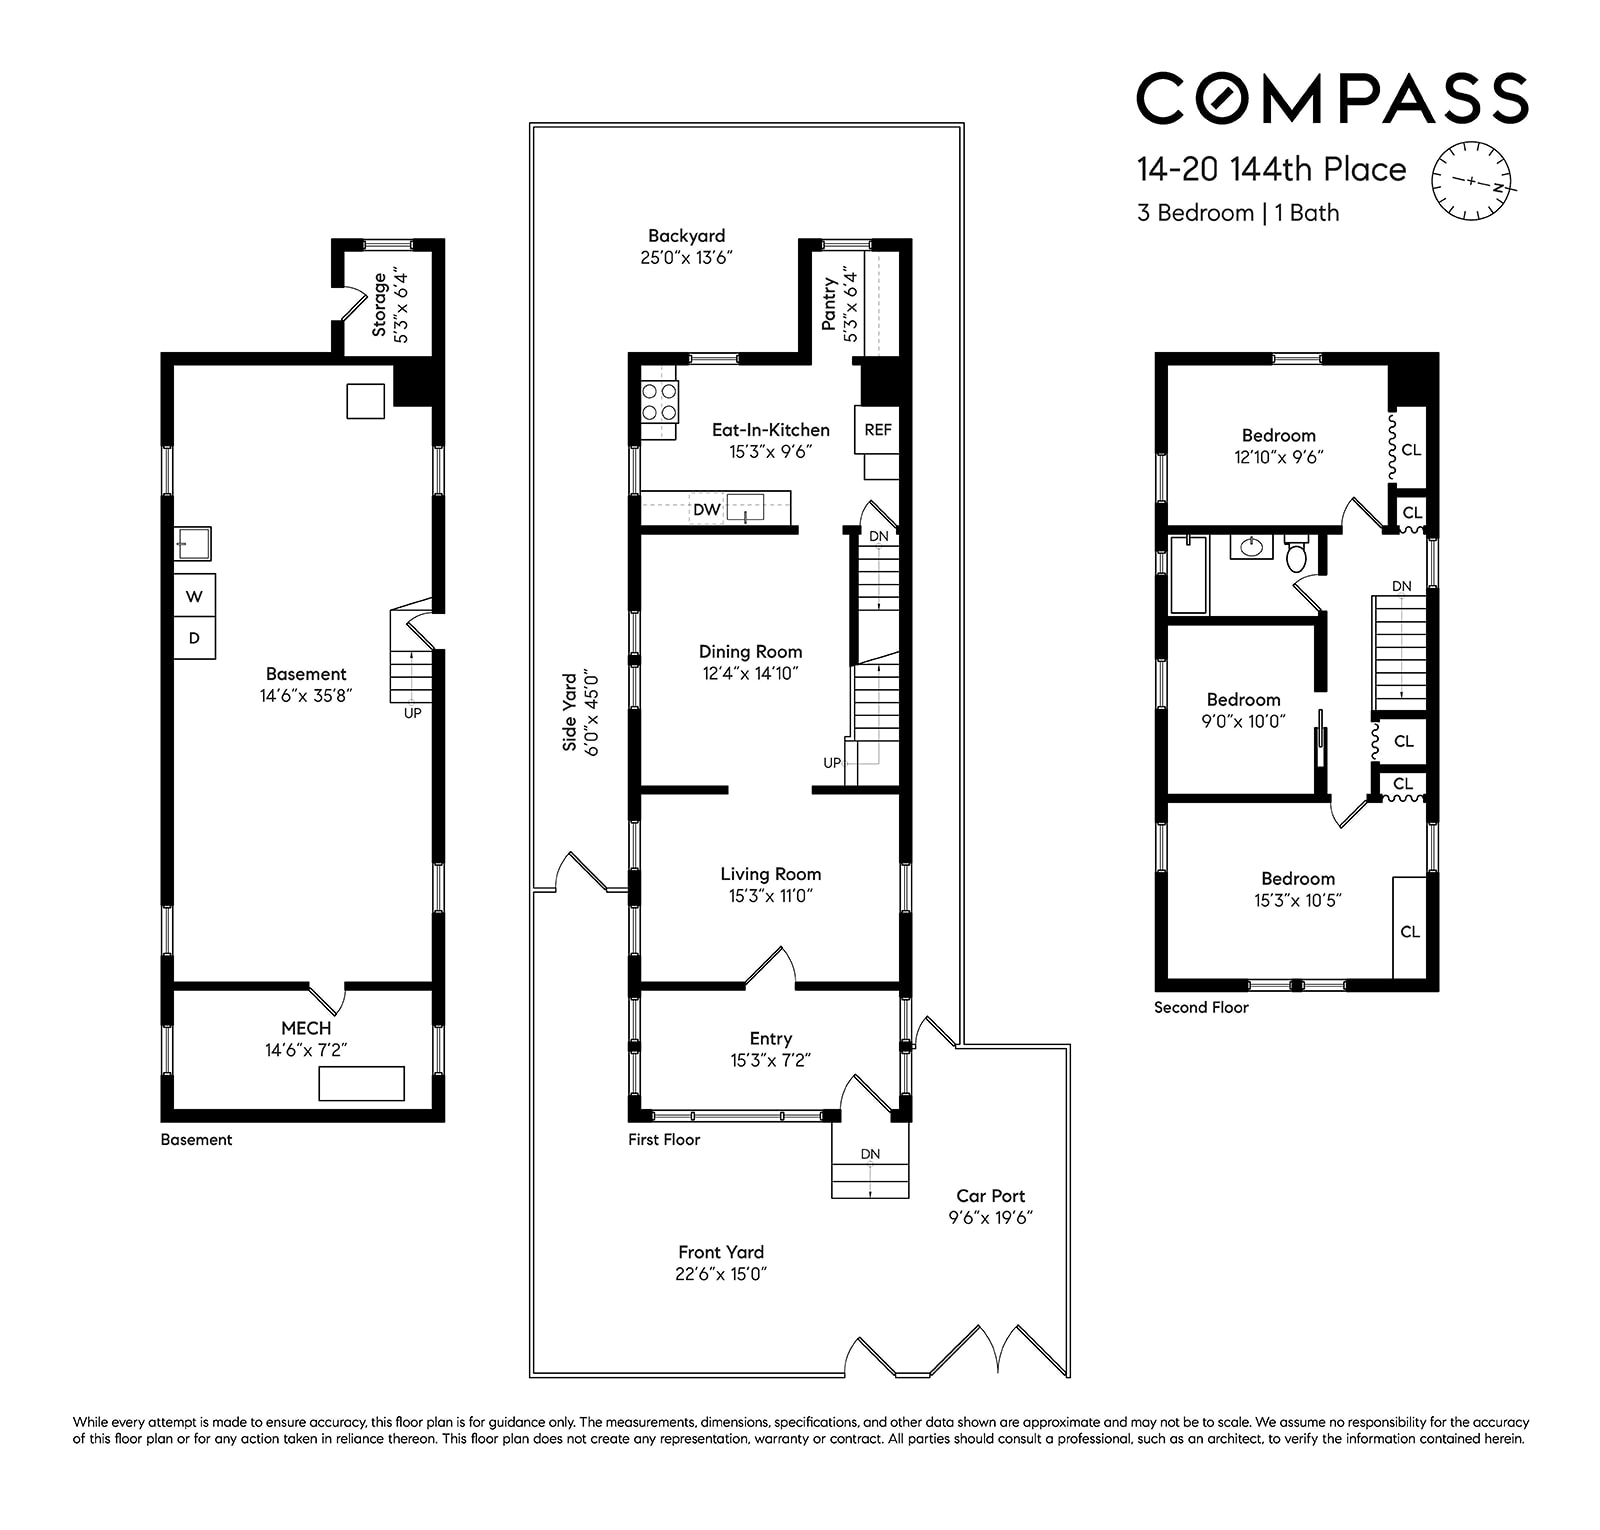 Floorplan for 14-20 144th Place